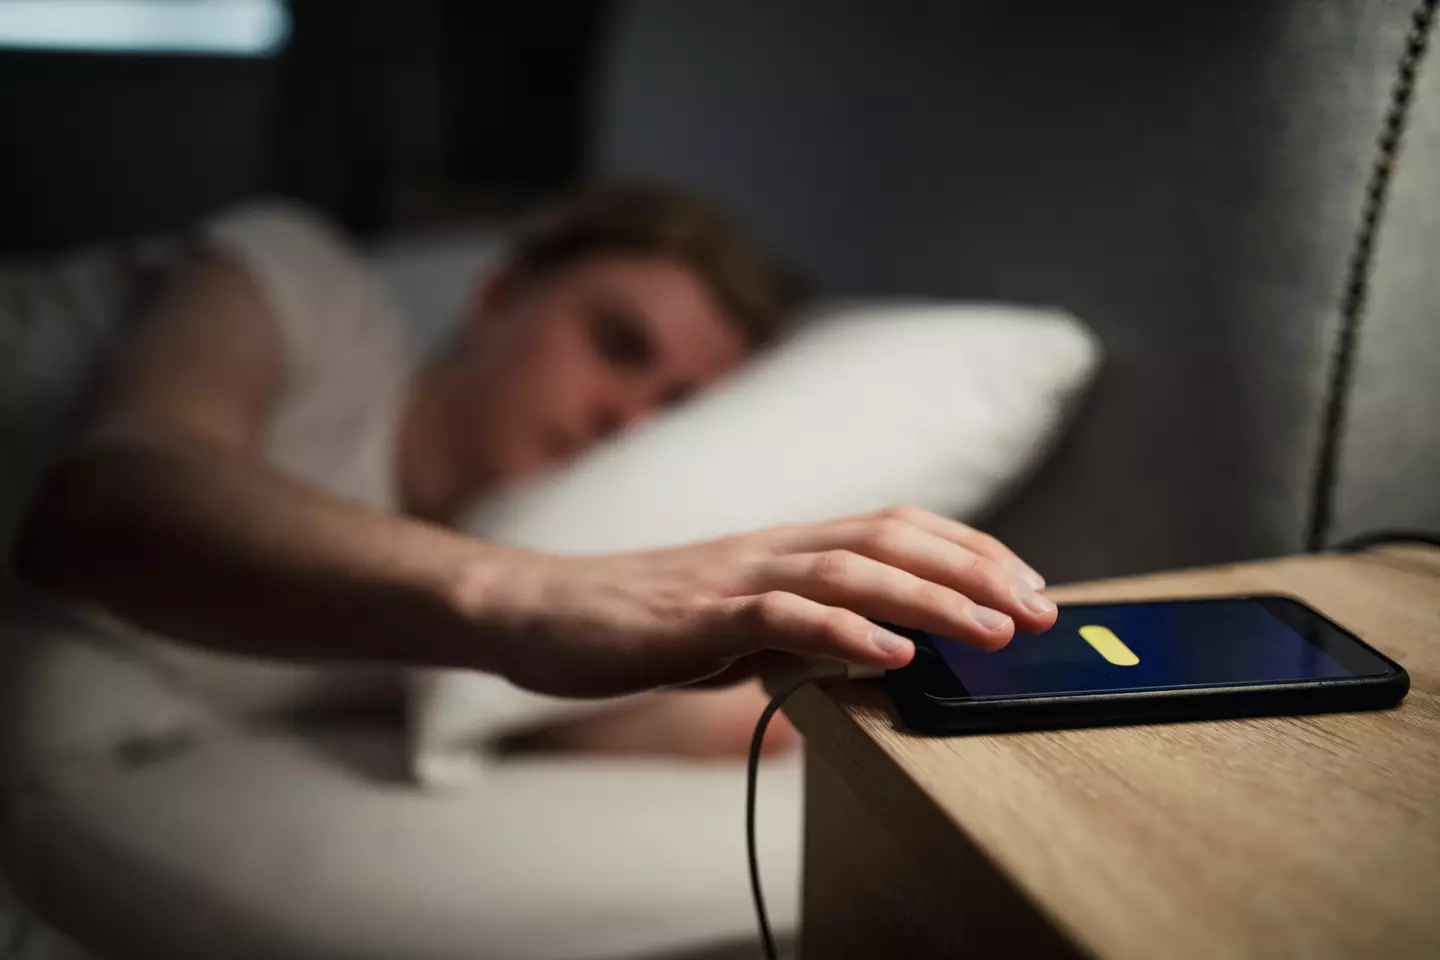 People say it's caused them to oversleep. (Getty Stock Images)